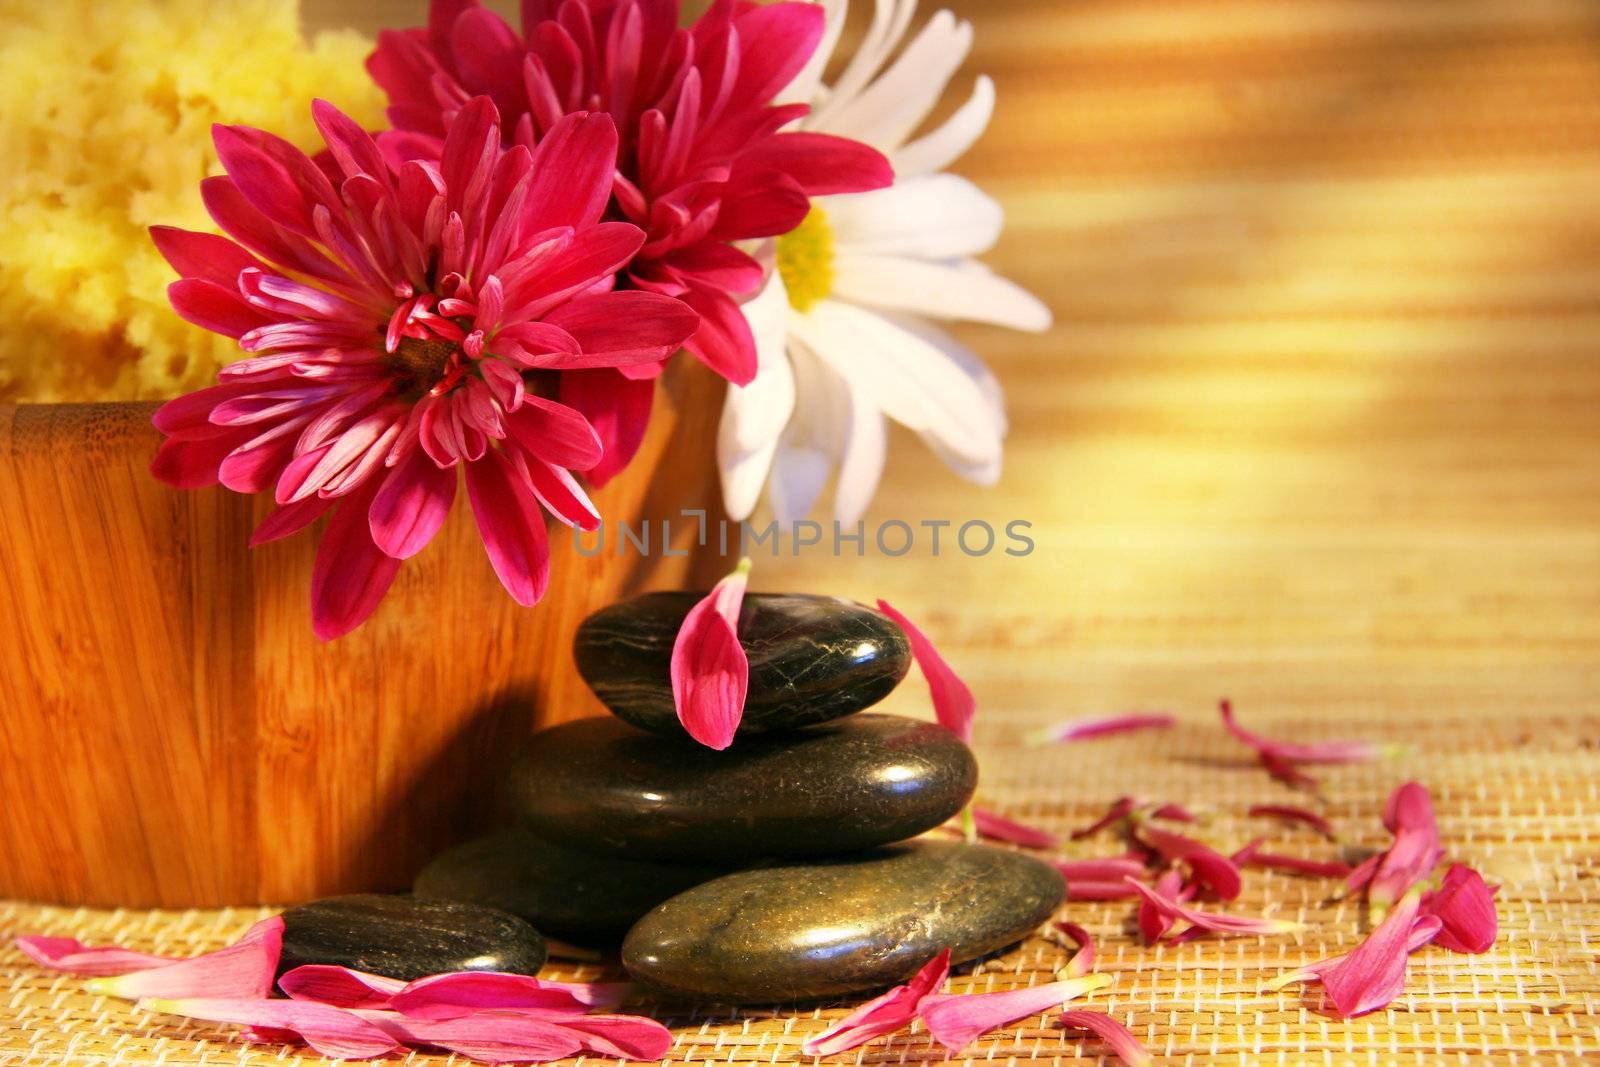  Aromatherapy with pink and white chrysanthemums,natural stones for relaxation